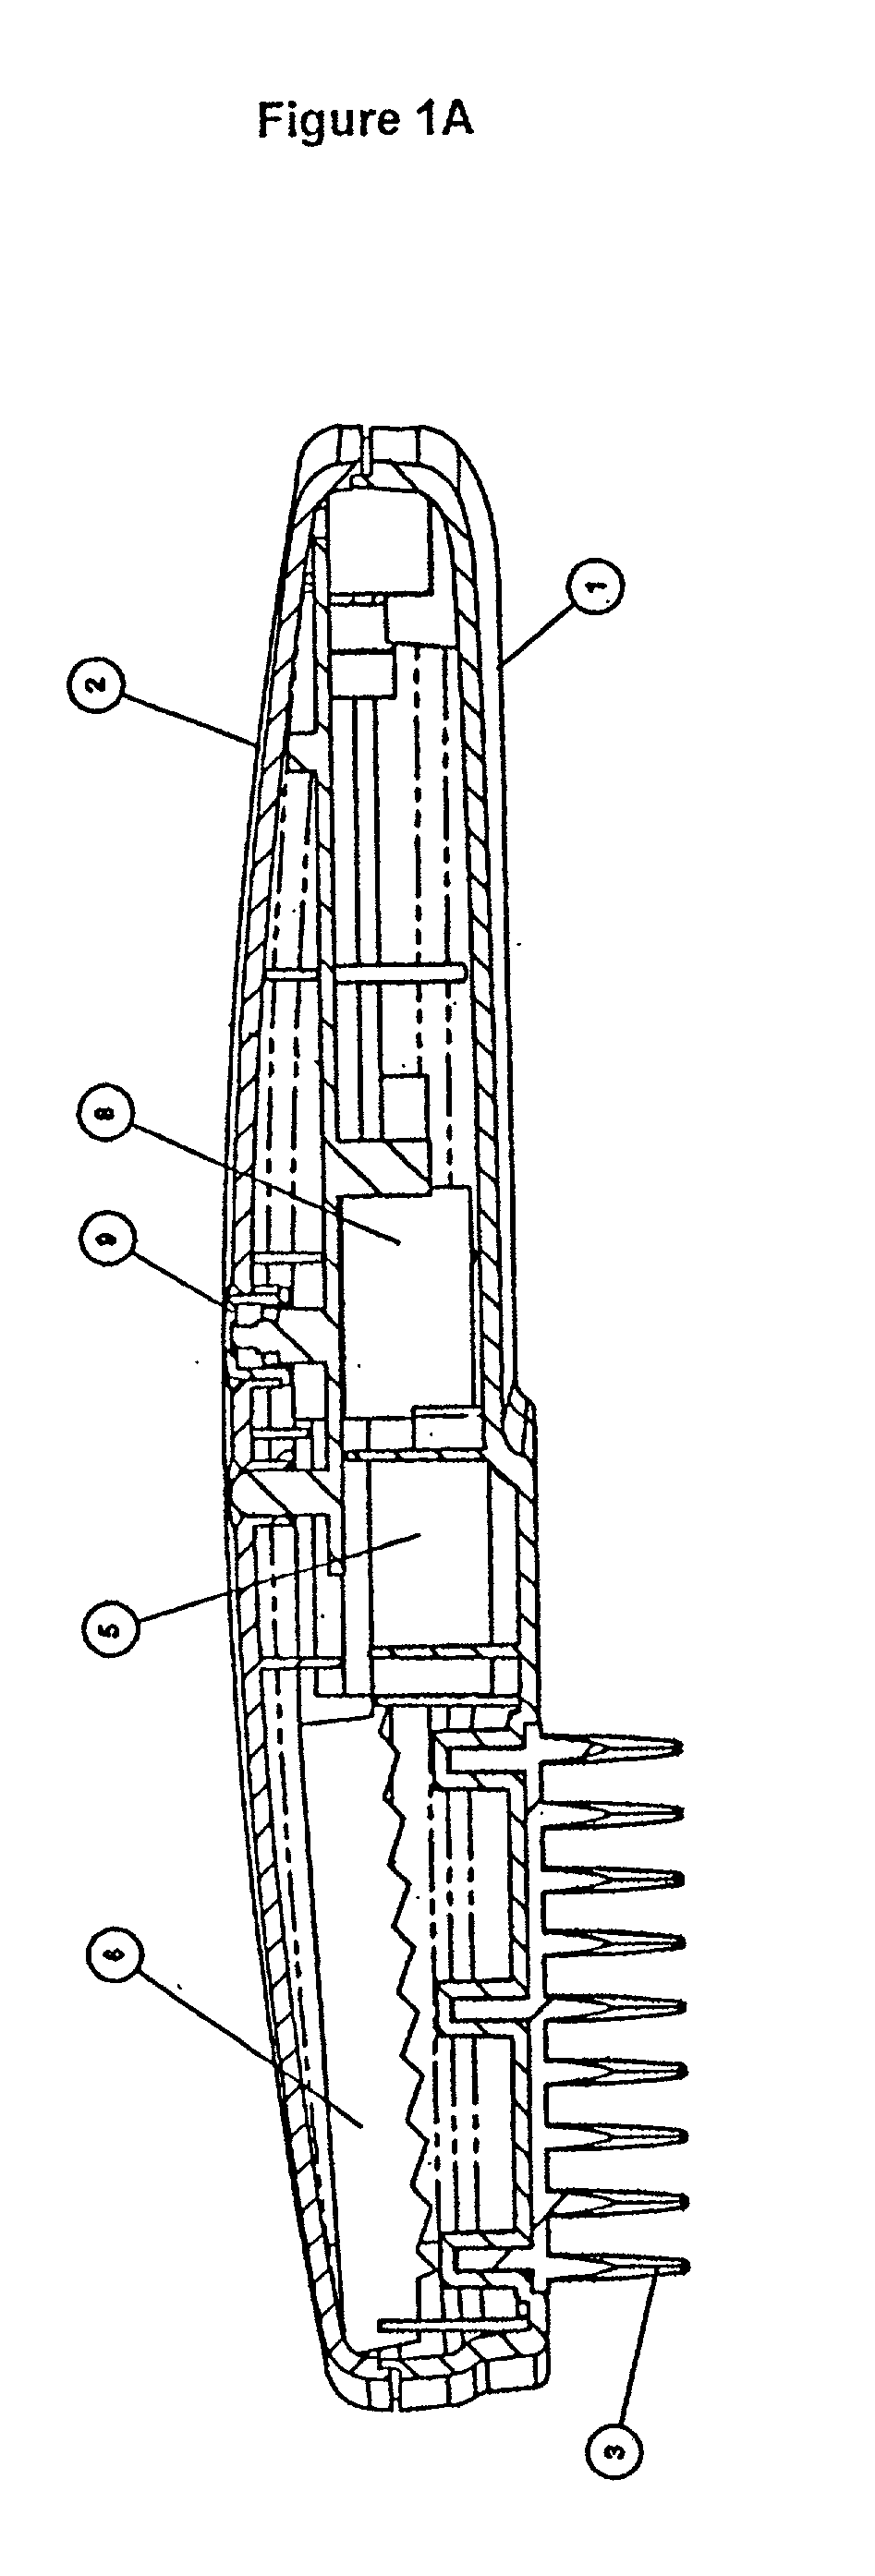 Apparatus and method for stimulating hair growth